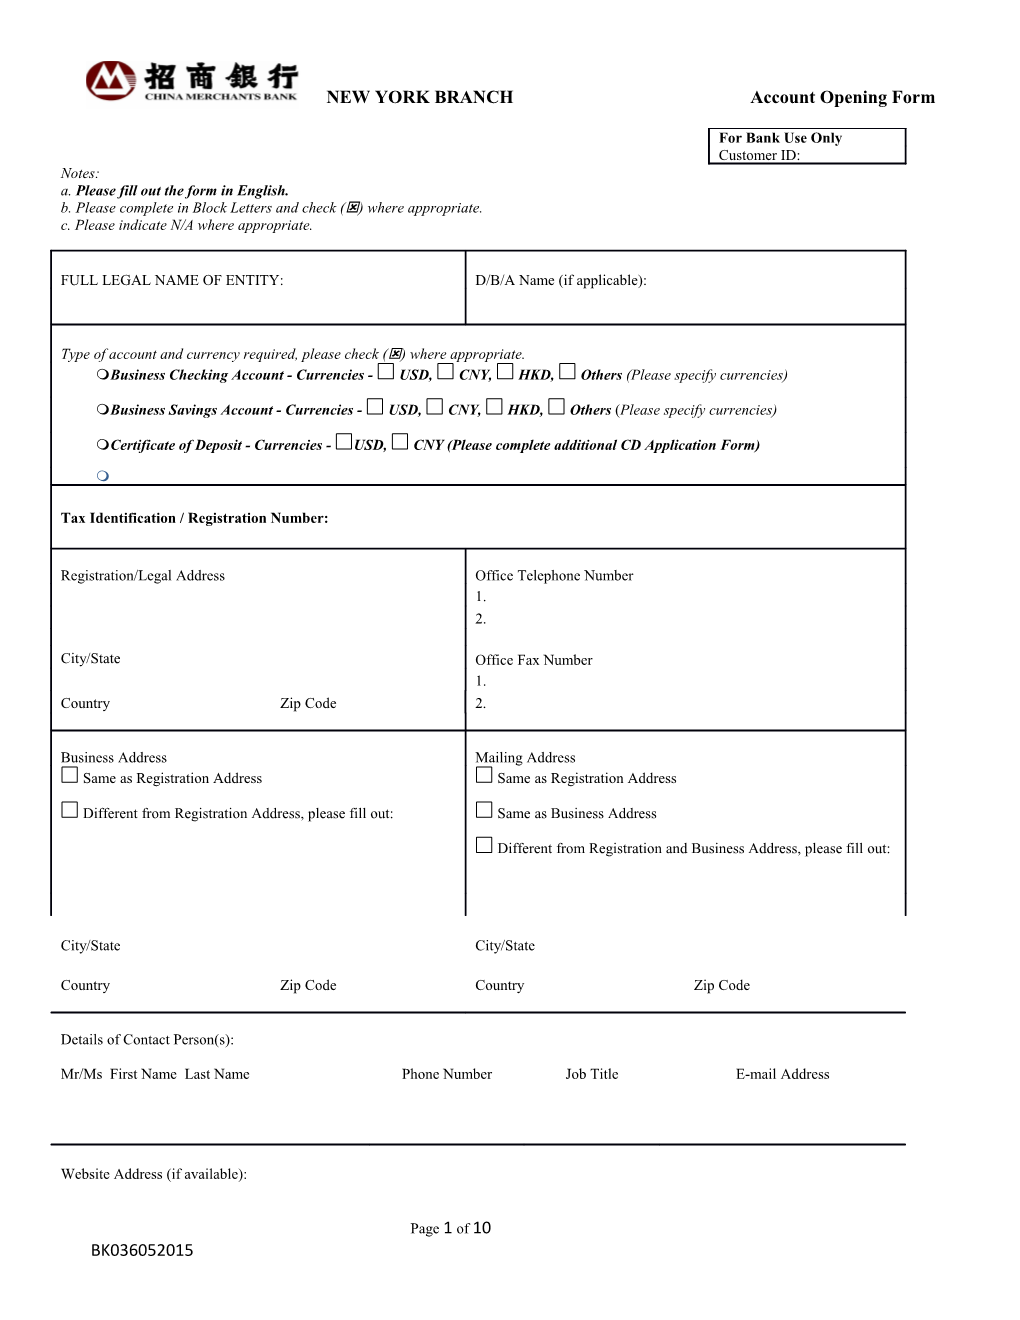 NEW YORK BRANCH Account Opening Form